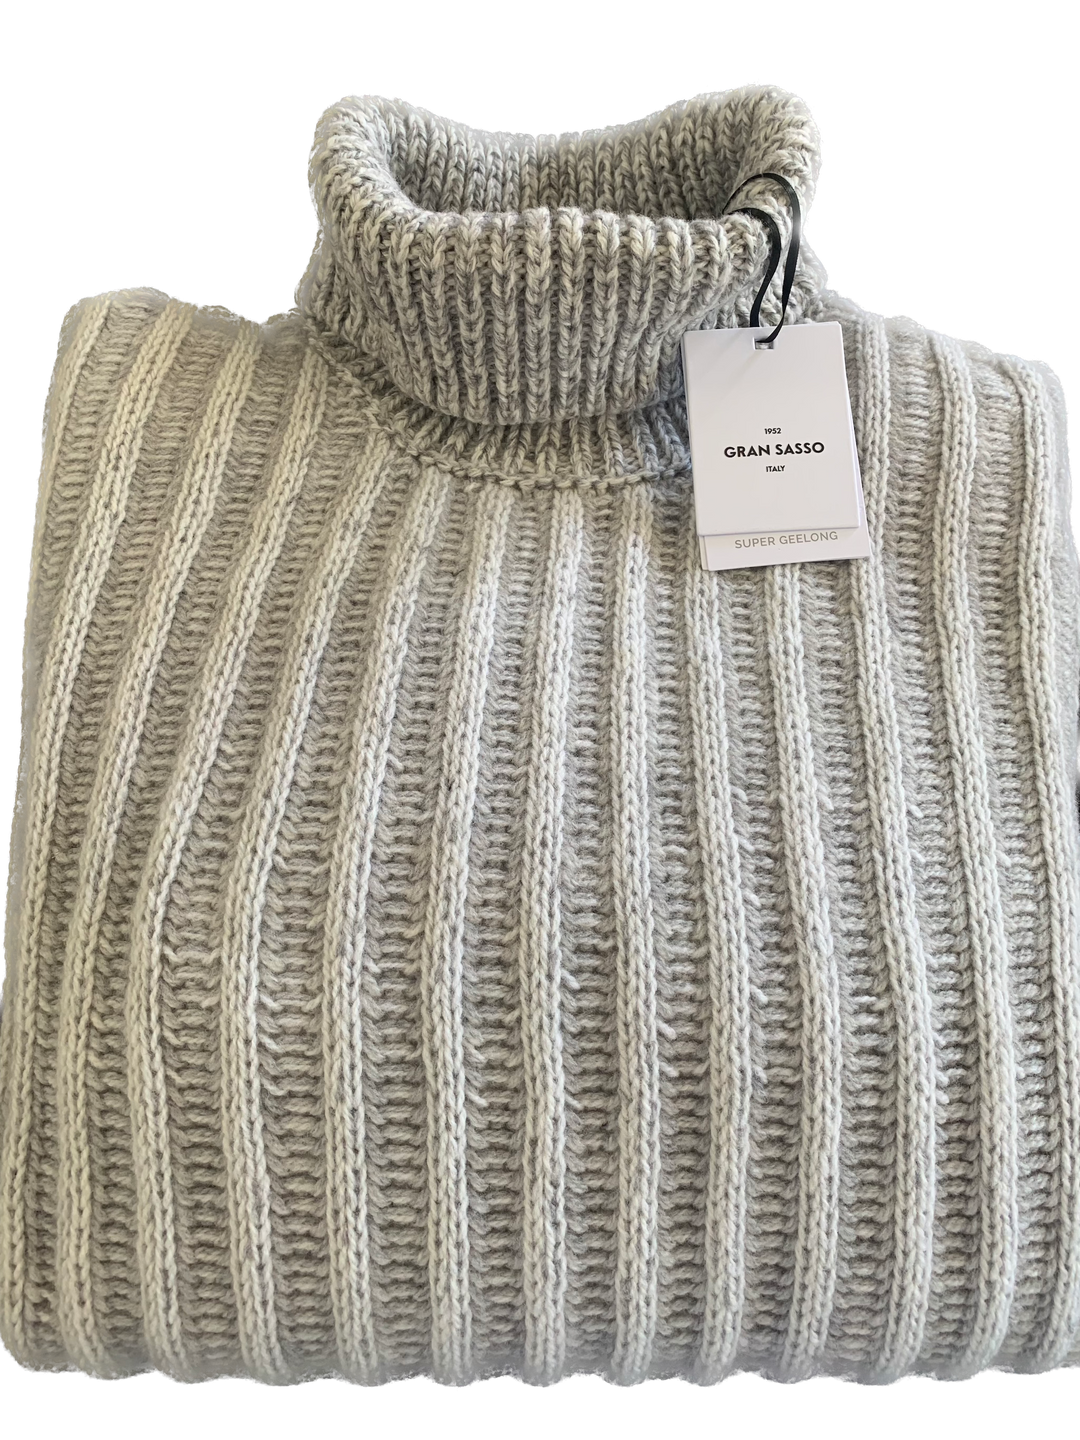 Gran Sasso - Super Geelong Turtle Neck Knit in Grey | Buster McGee